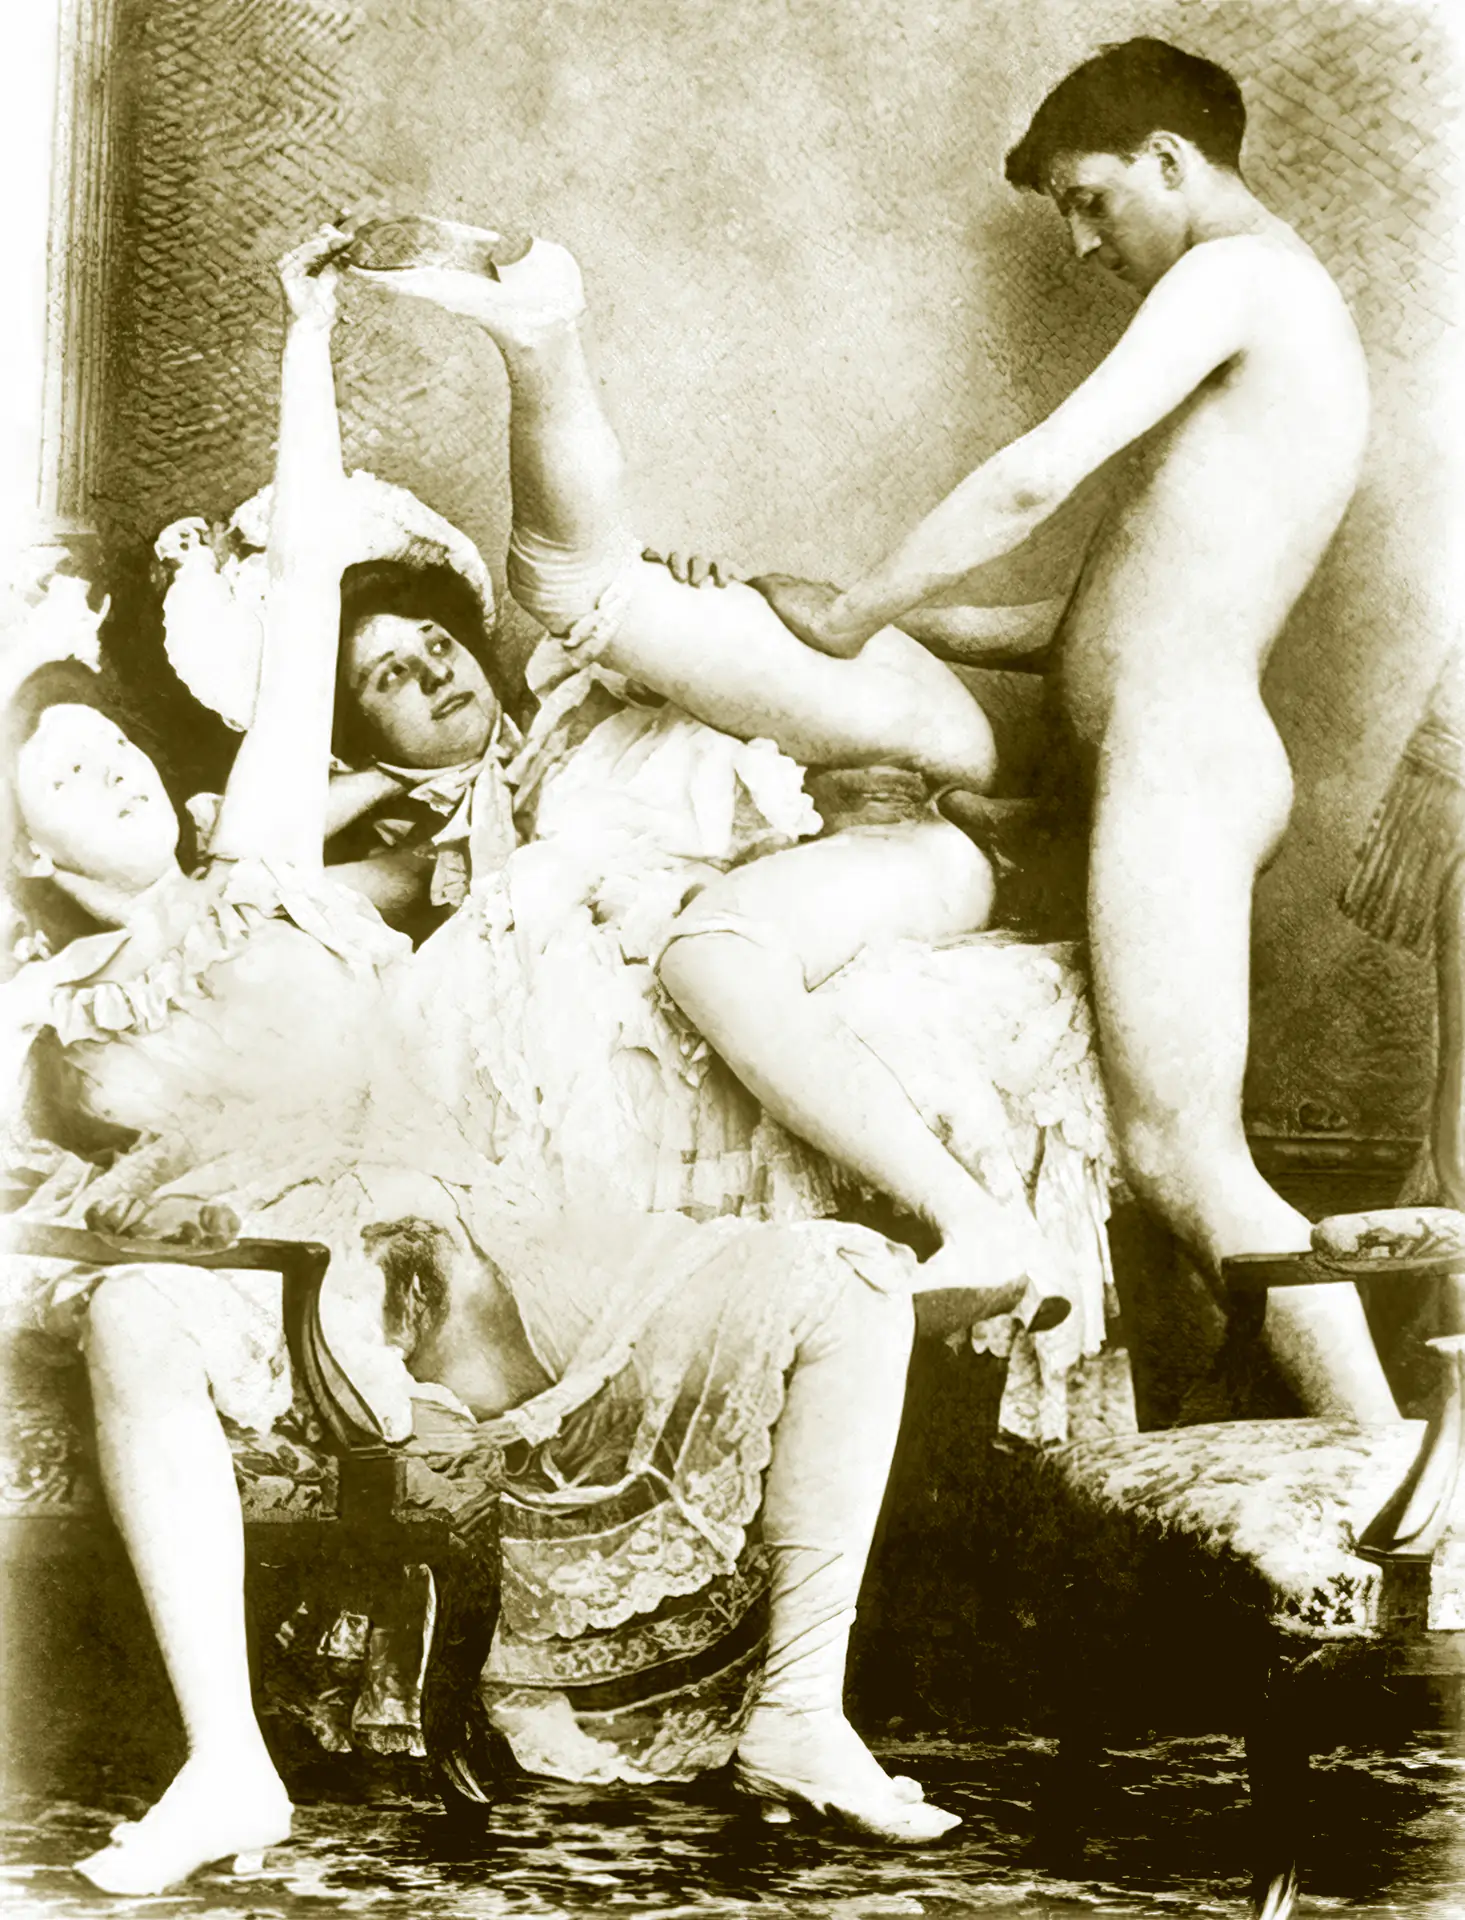 Vintage orgy porn photo Antique sex: horny young stud happy to fuck two hairy women